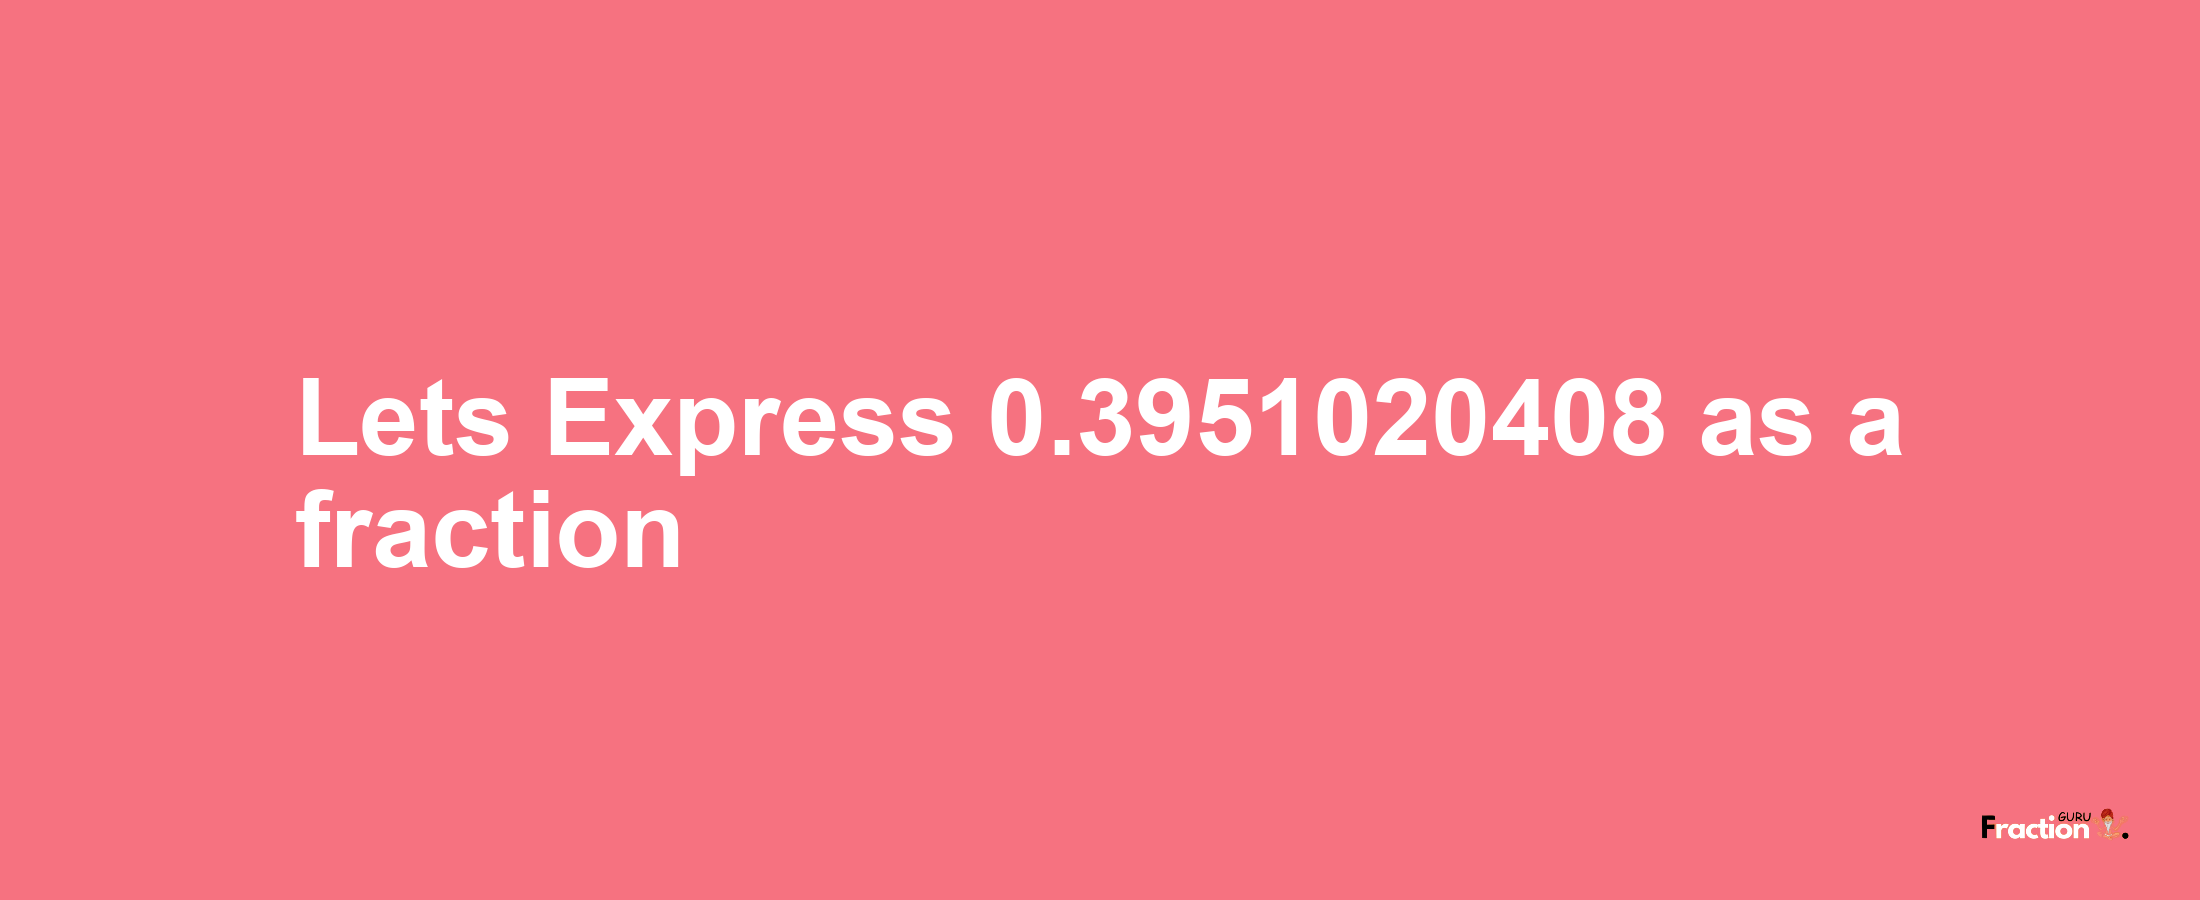 Lets Express 0.3951020408 as afraction